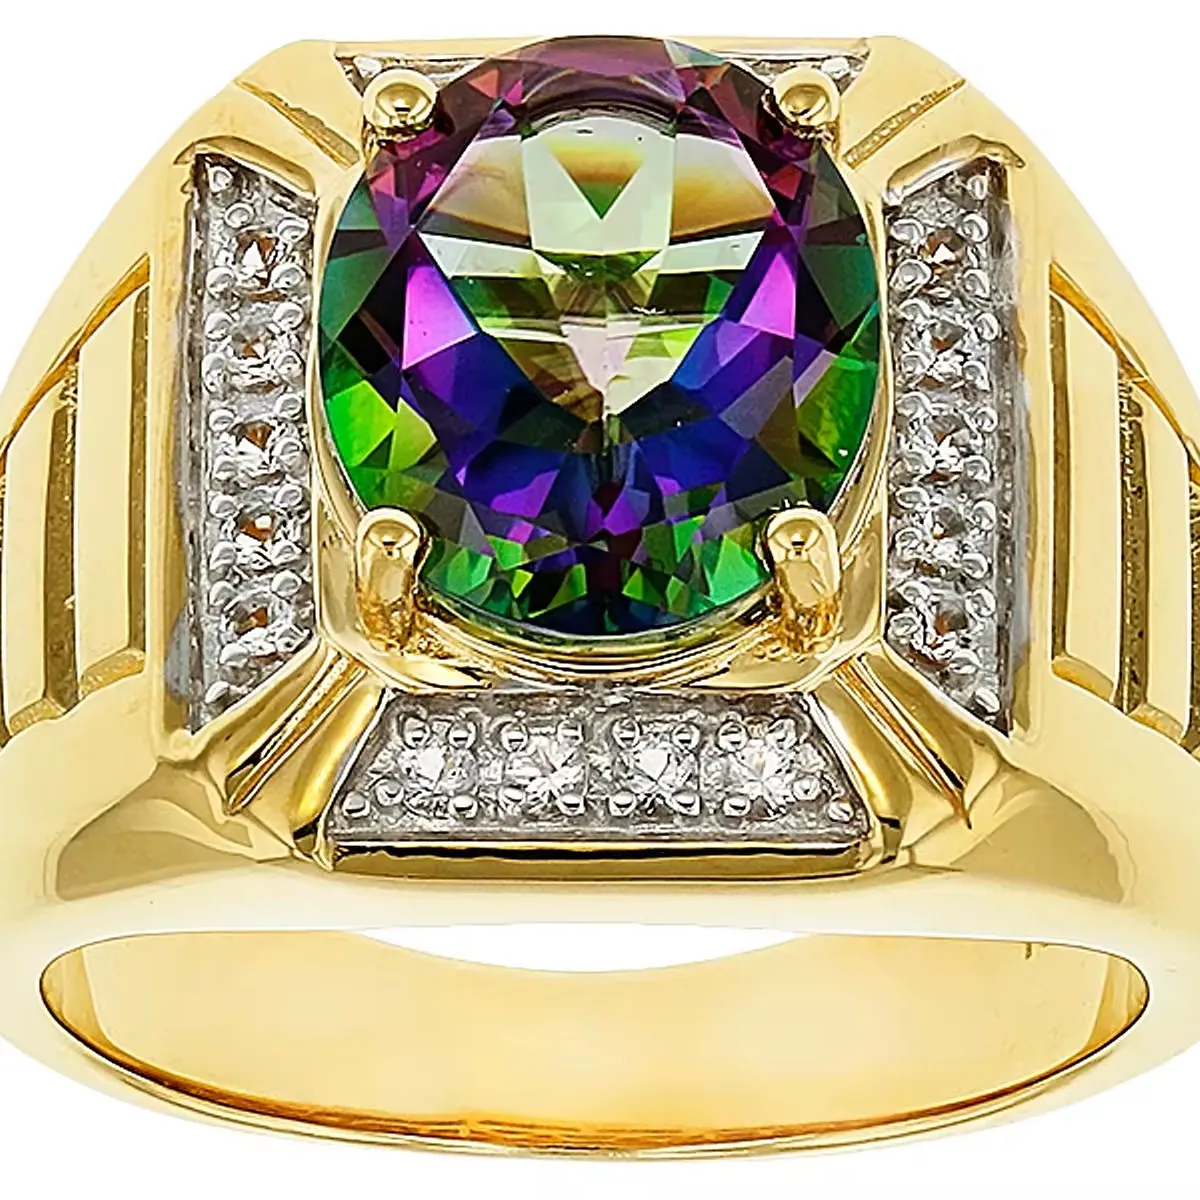 Multicolor Mystic Topaz Gent's Ring | 18K Yellow Gold Over Silver | Unique and Stylish Design | Gemstone Jewelry Wholesale